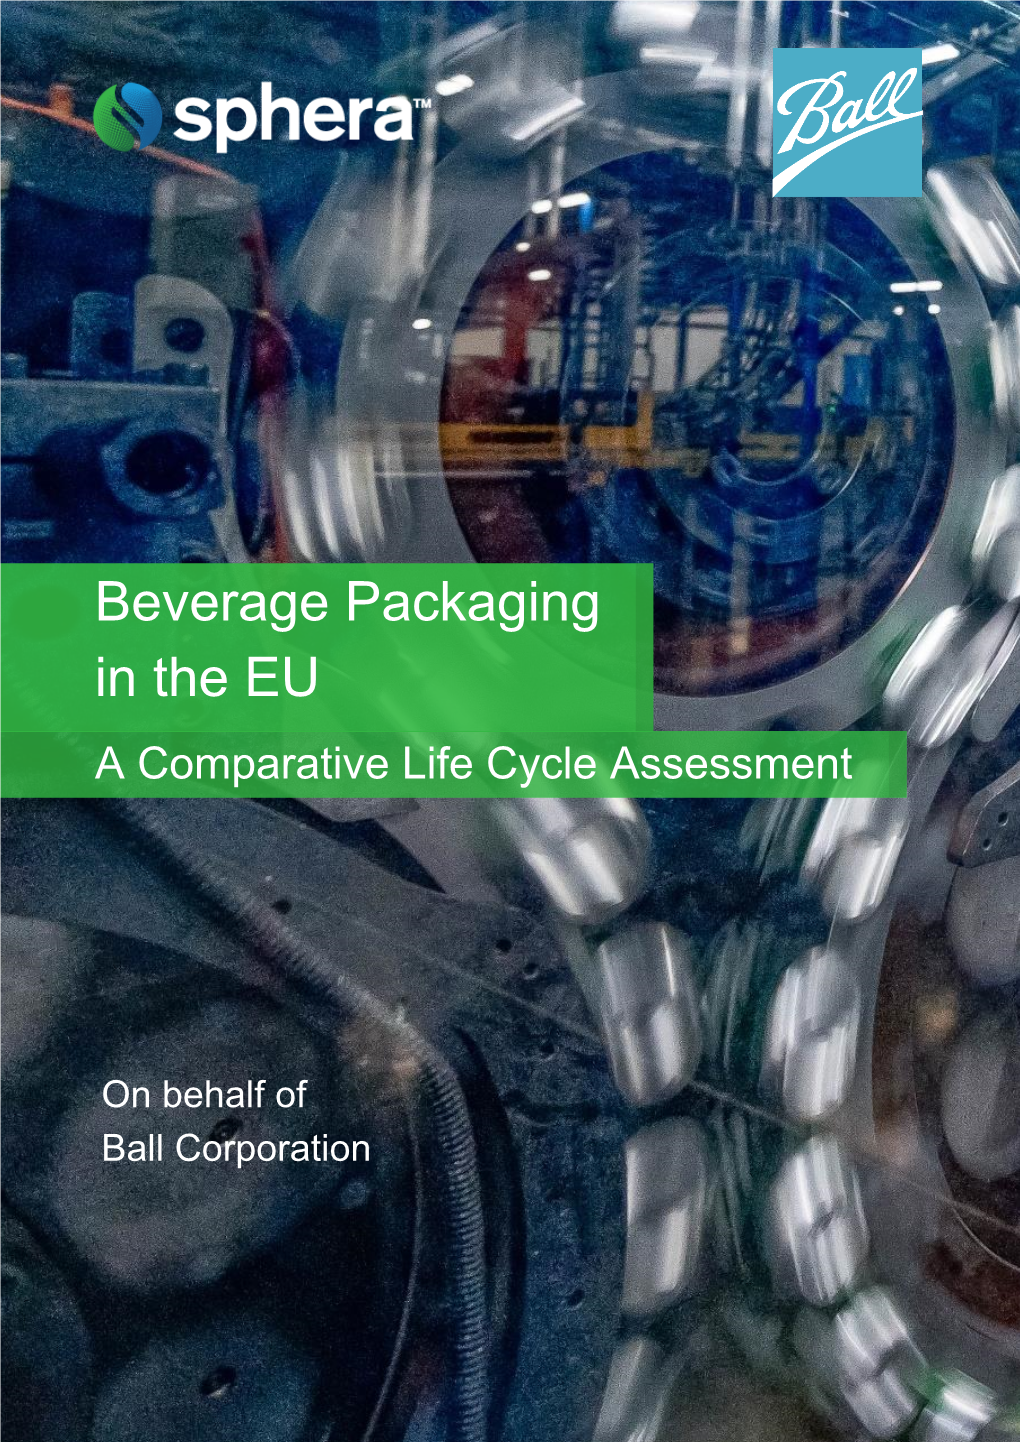 Beverage Packaging in the EU a Comparative Life Cycle Assessment